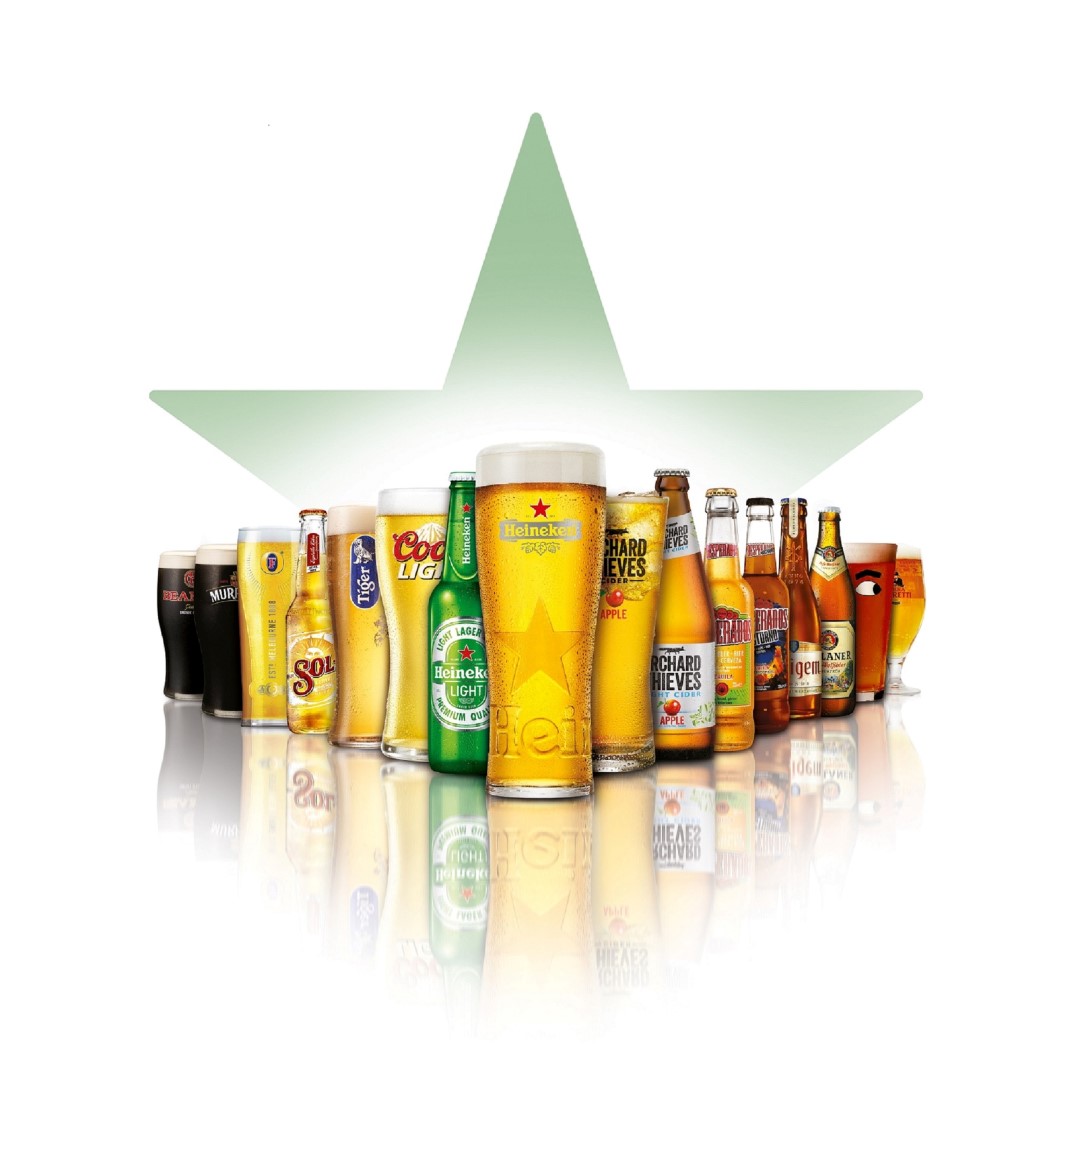 Sales of Heineken lager were up 7.7%, “its strongest performance in more than a decade”.